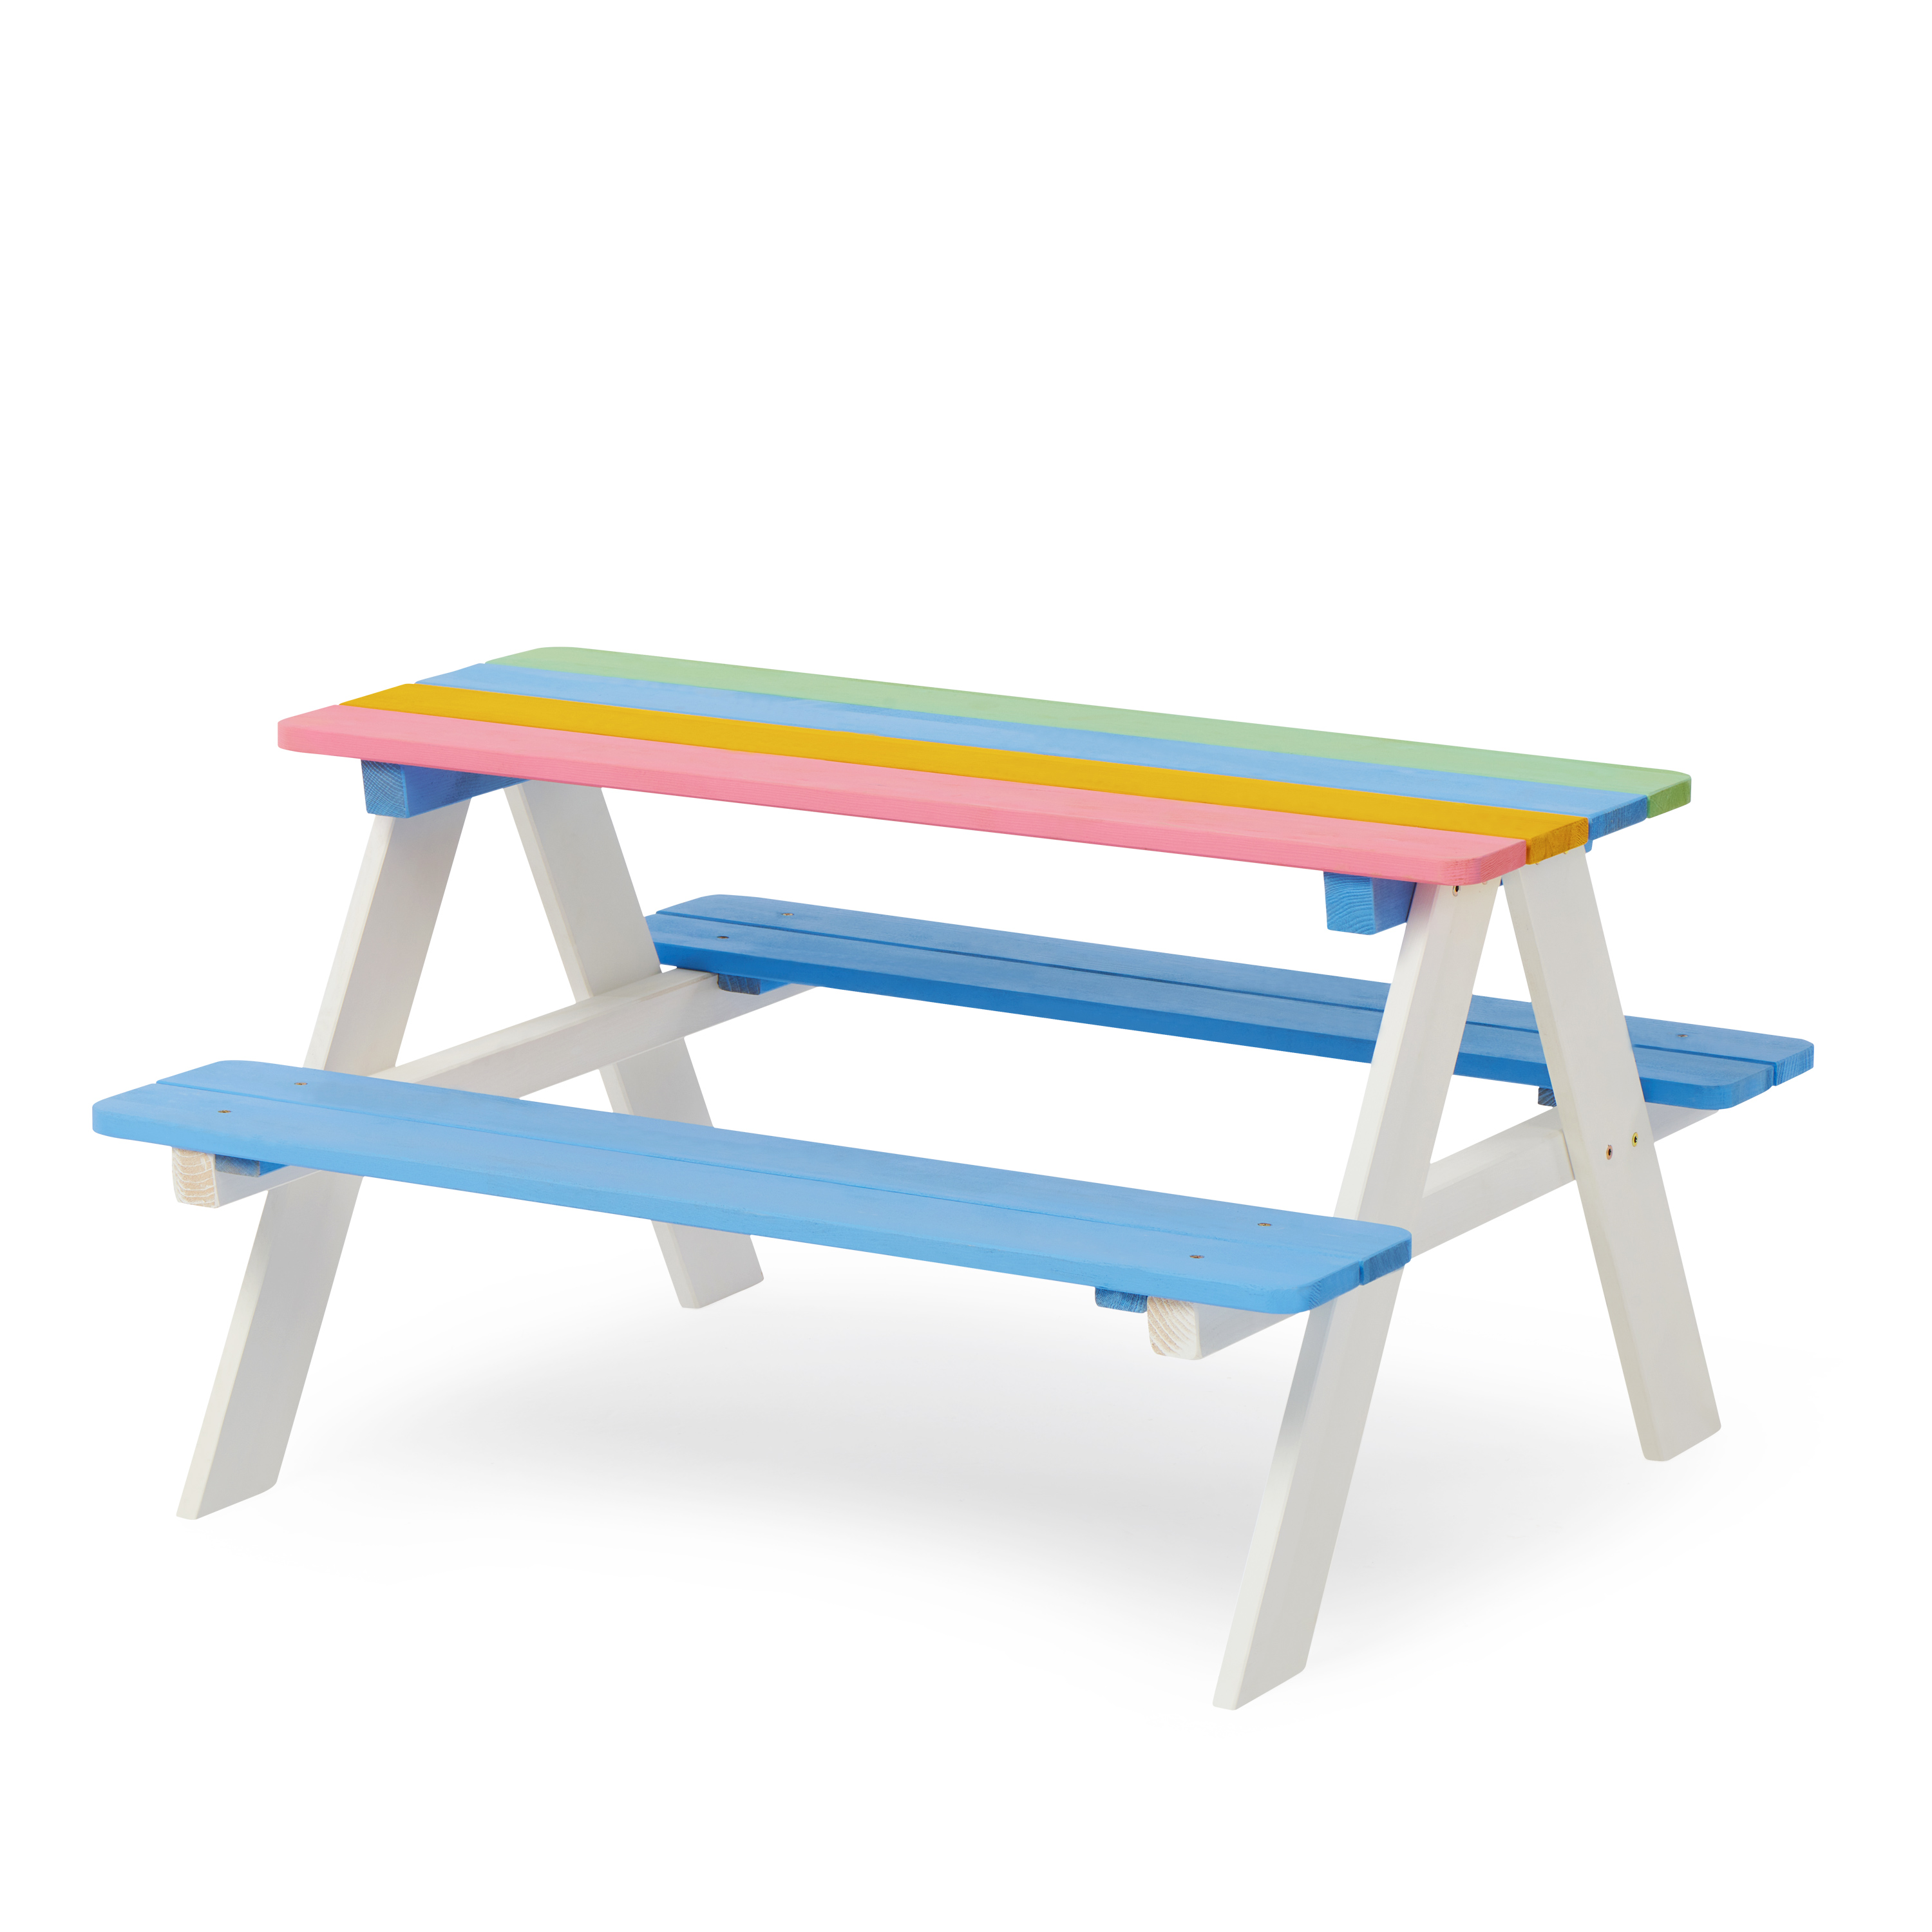 D-road Outdoor Kids Picnic Table & Bench Set, Cedar Wood, Rainbow Color - image 1 of 6